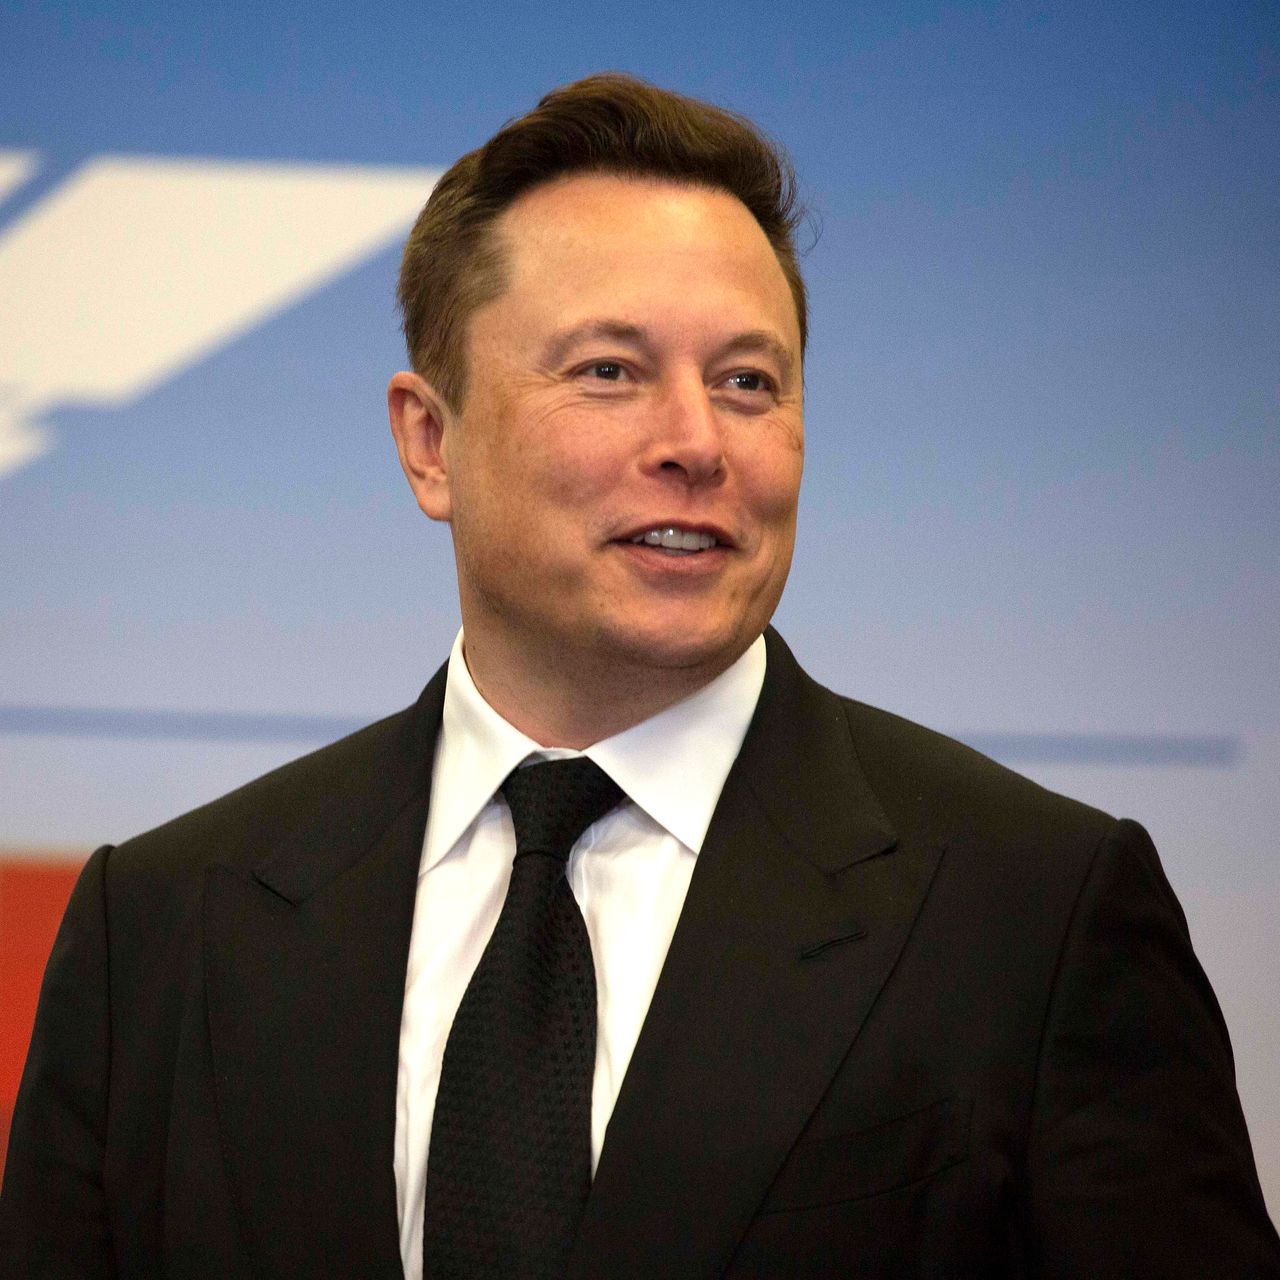 5 Things Elon Musk Should Consider Before Making Further Cuts